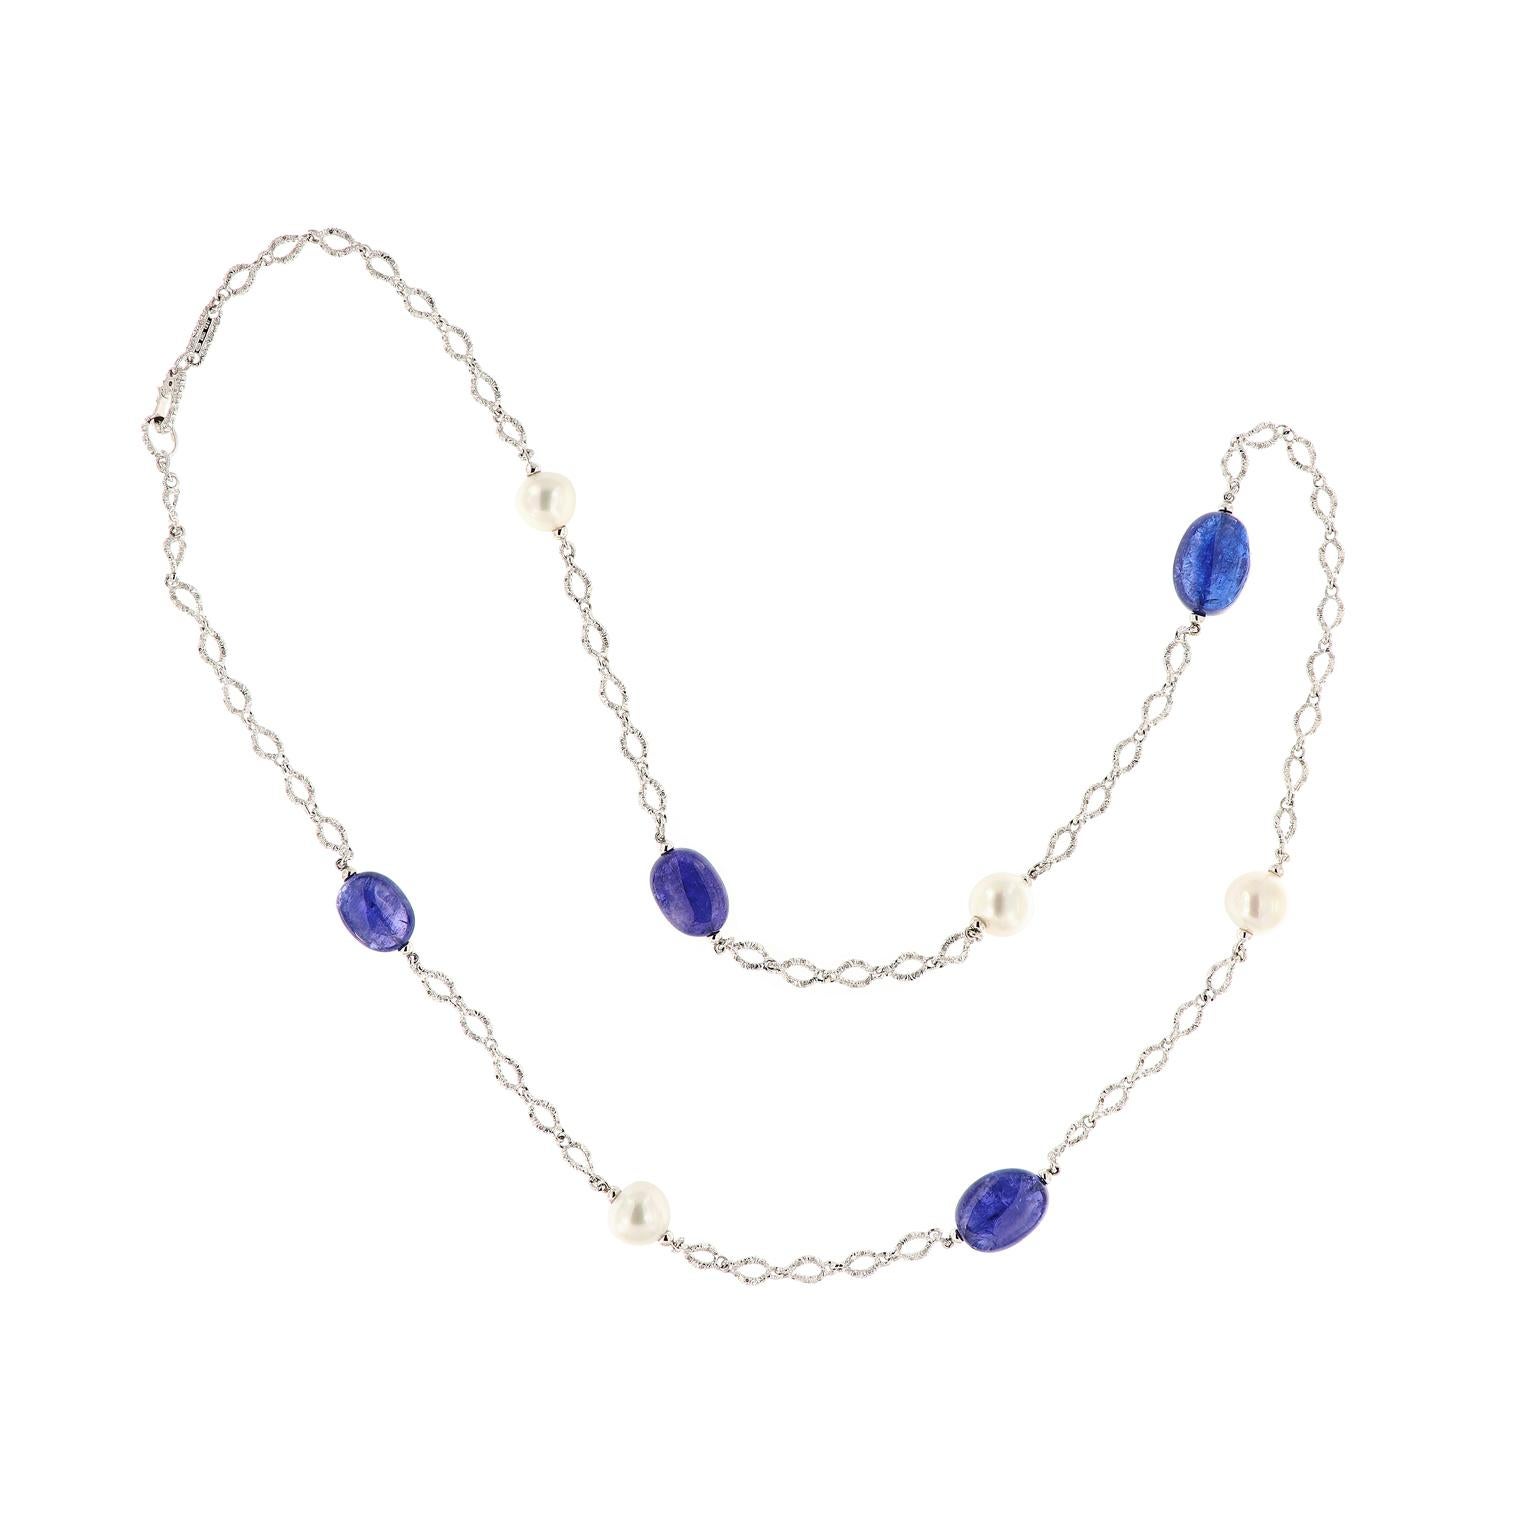 This stunning station necklace features alternating tumbled tanzanite beads and South Sea Pearls on a fancy bright cut 18 karat white gold Italian chain. The necklace is from the G-One Collection designed by Goshwara. The necklace is 36 inches long.